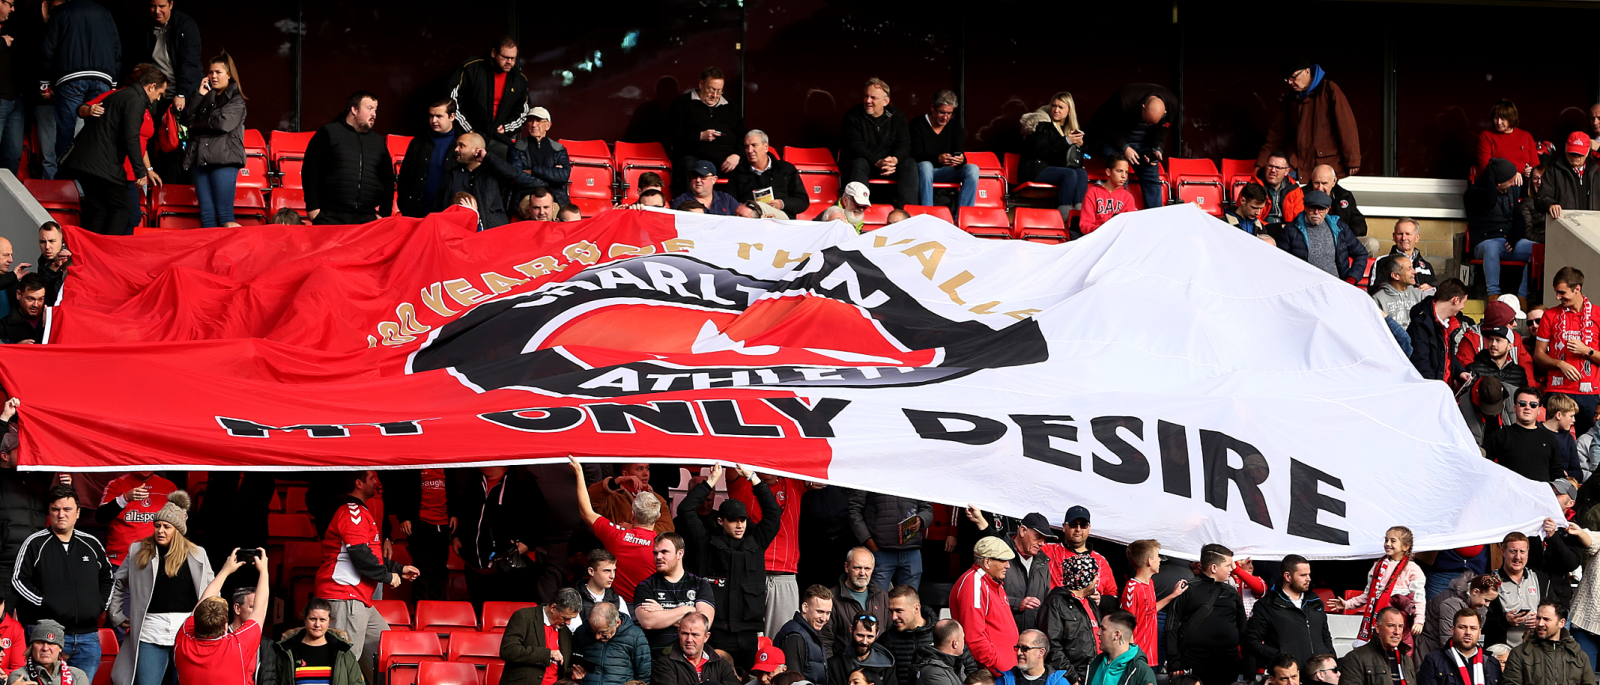 Supporters hold a flag aloft at The Valley